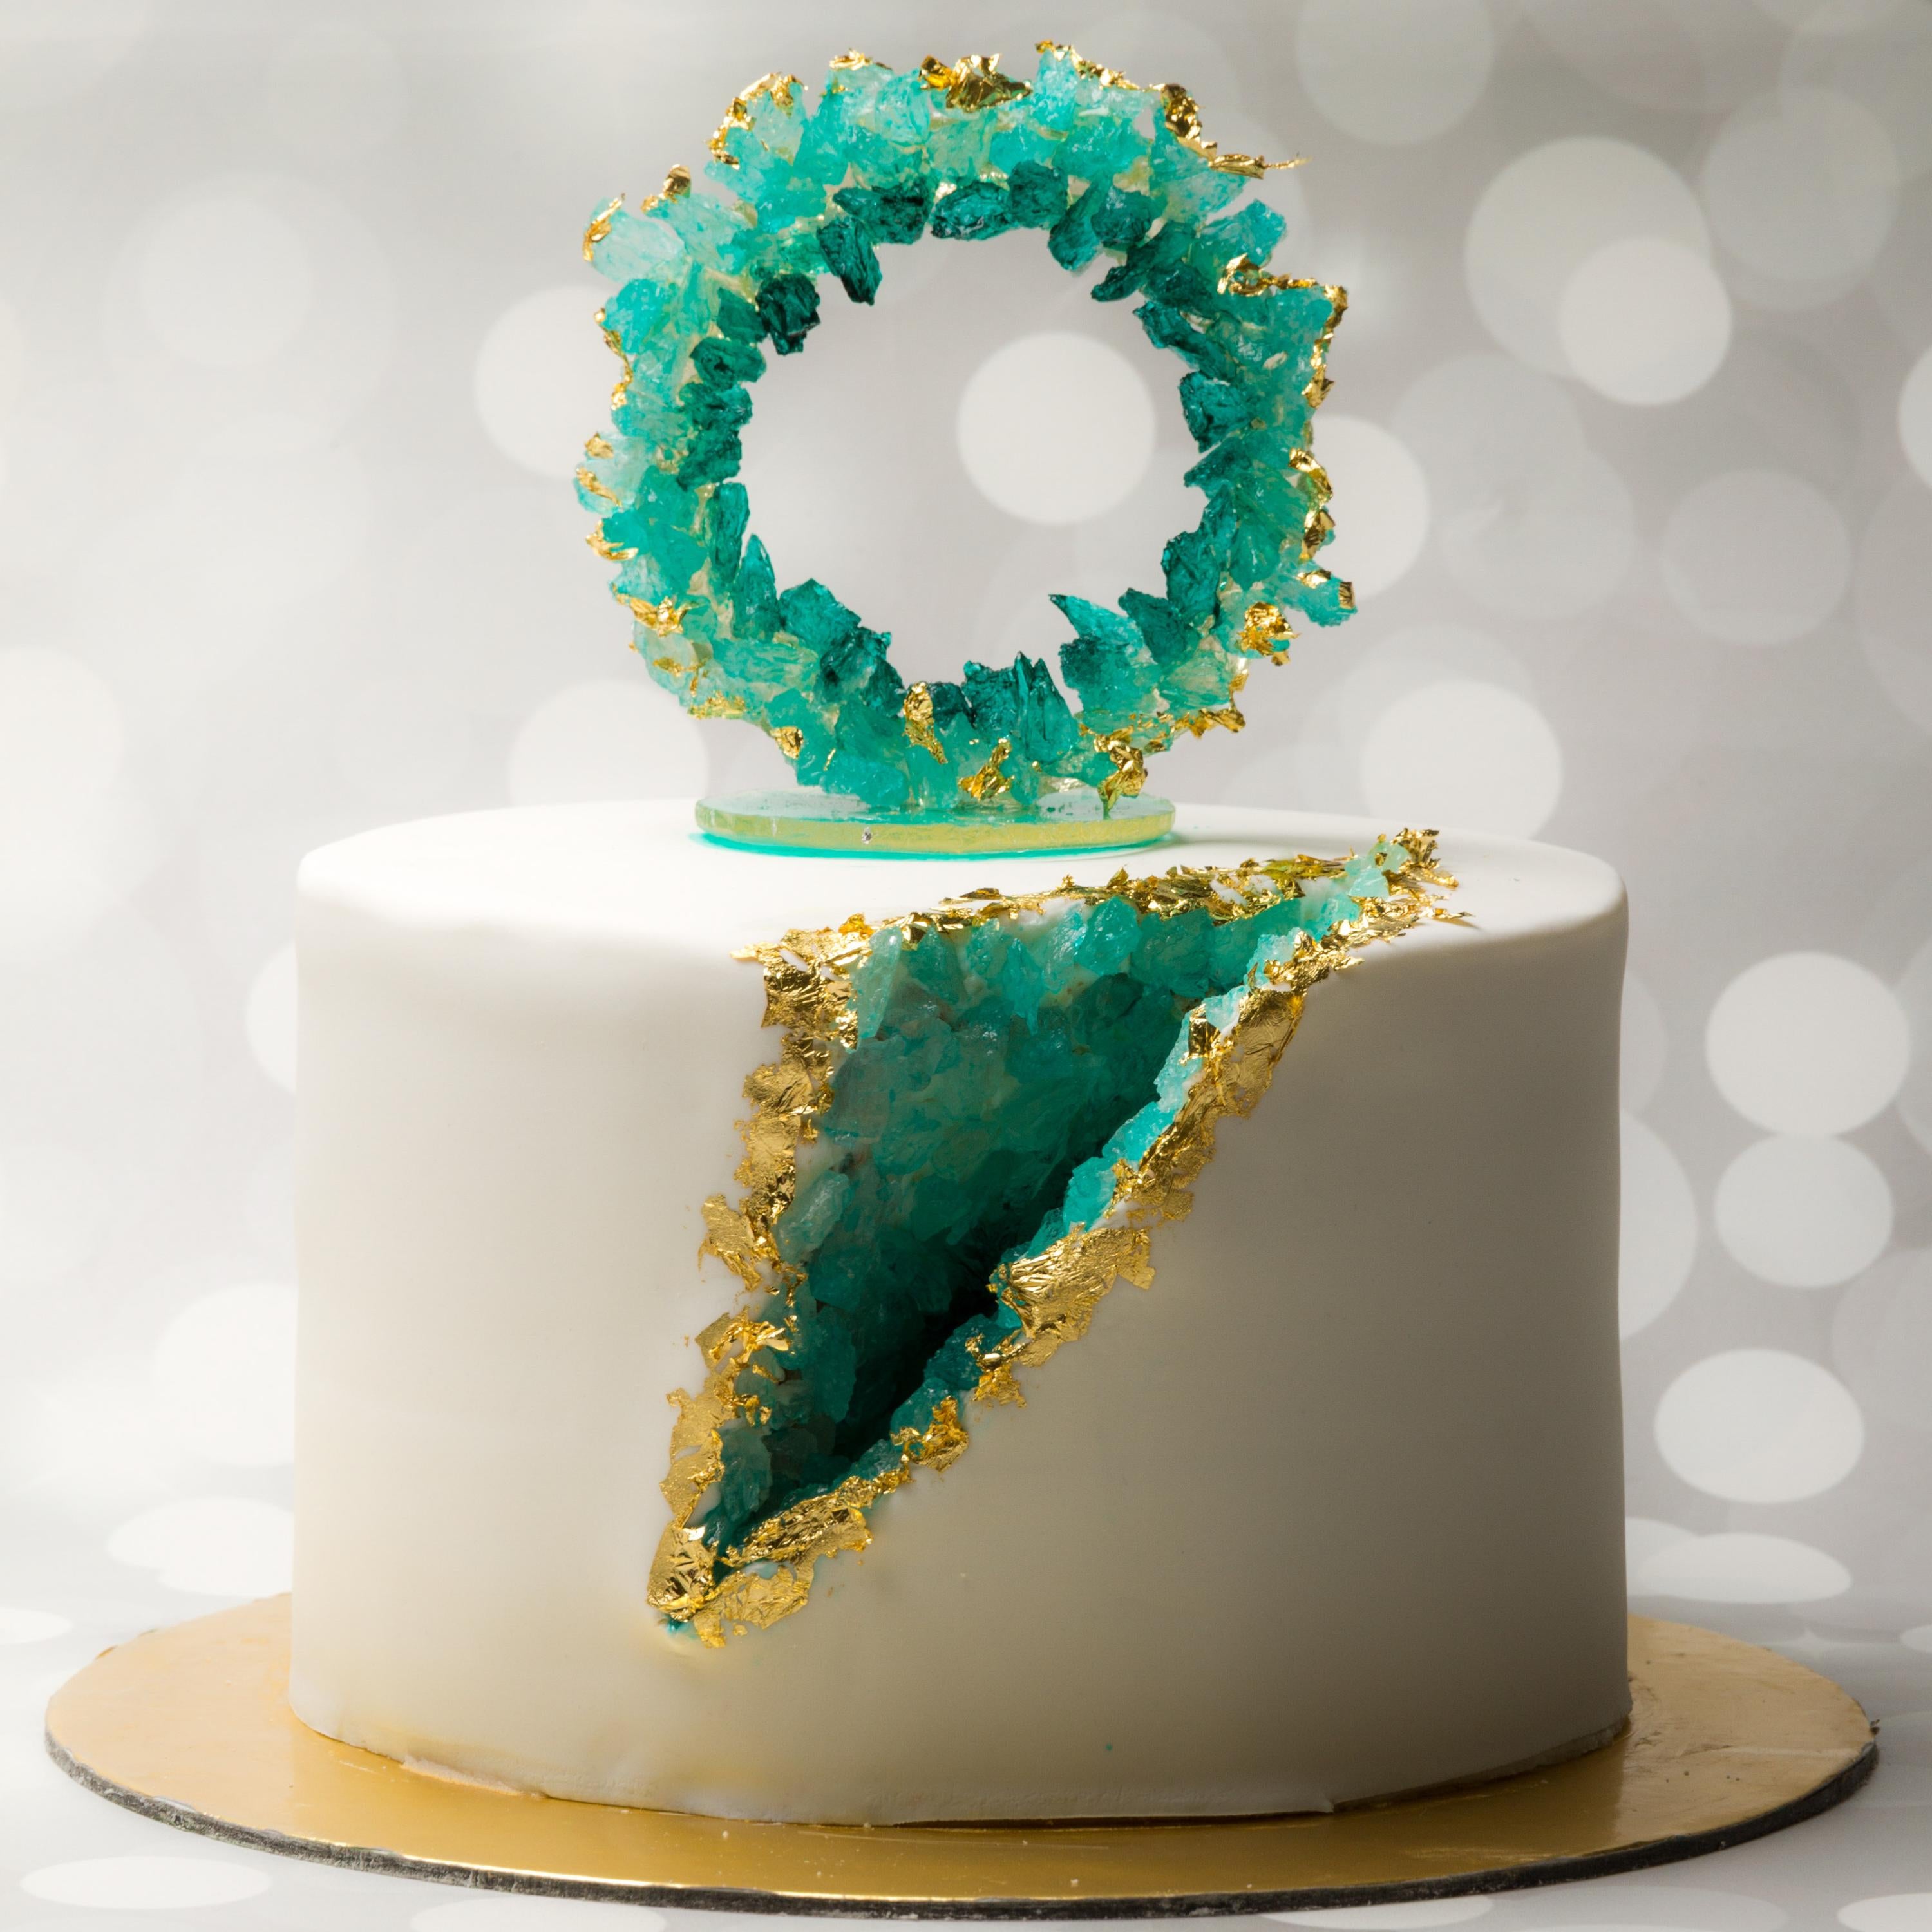 Geode Cake - Decorated Cake by Sayantanis Culinary - CakesDecor